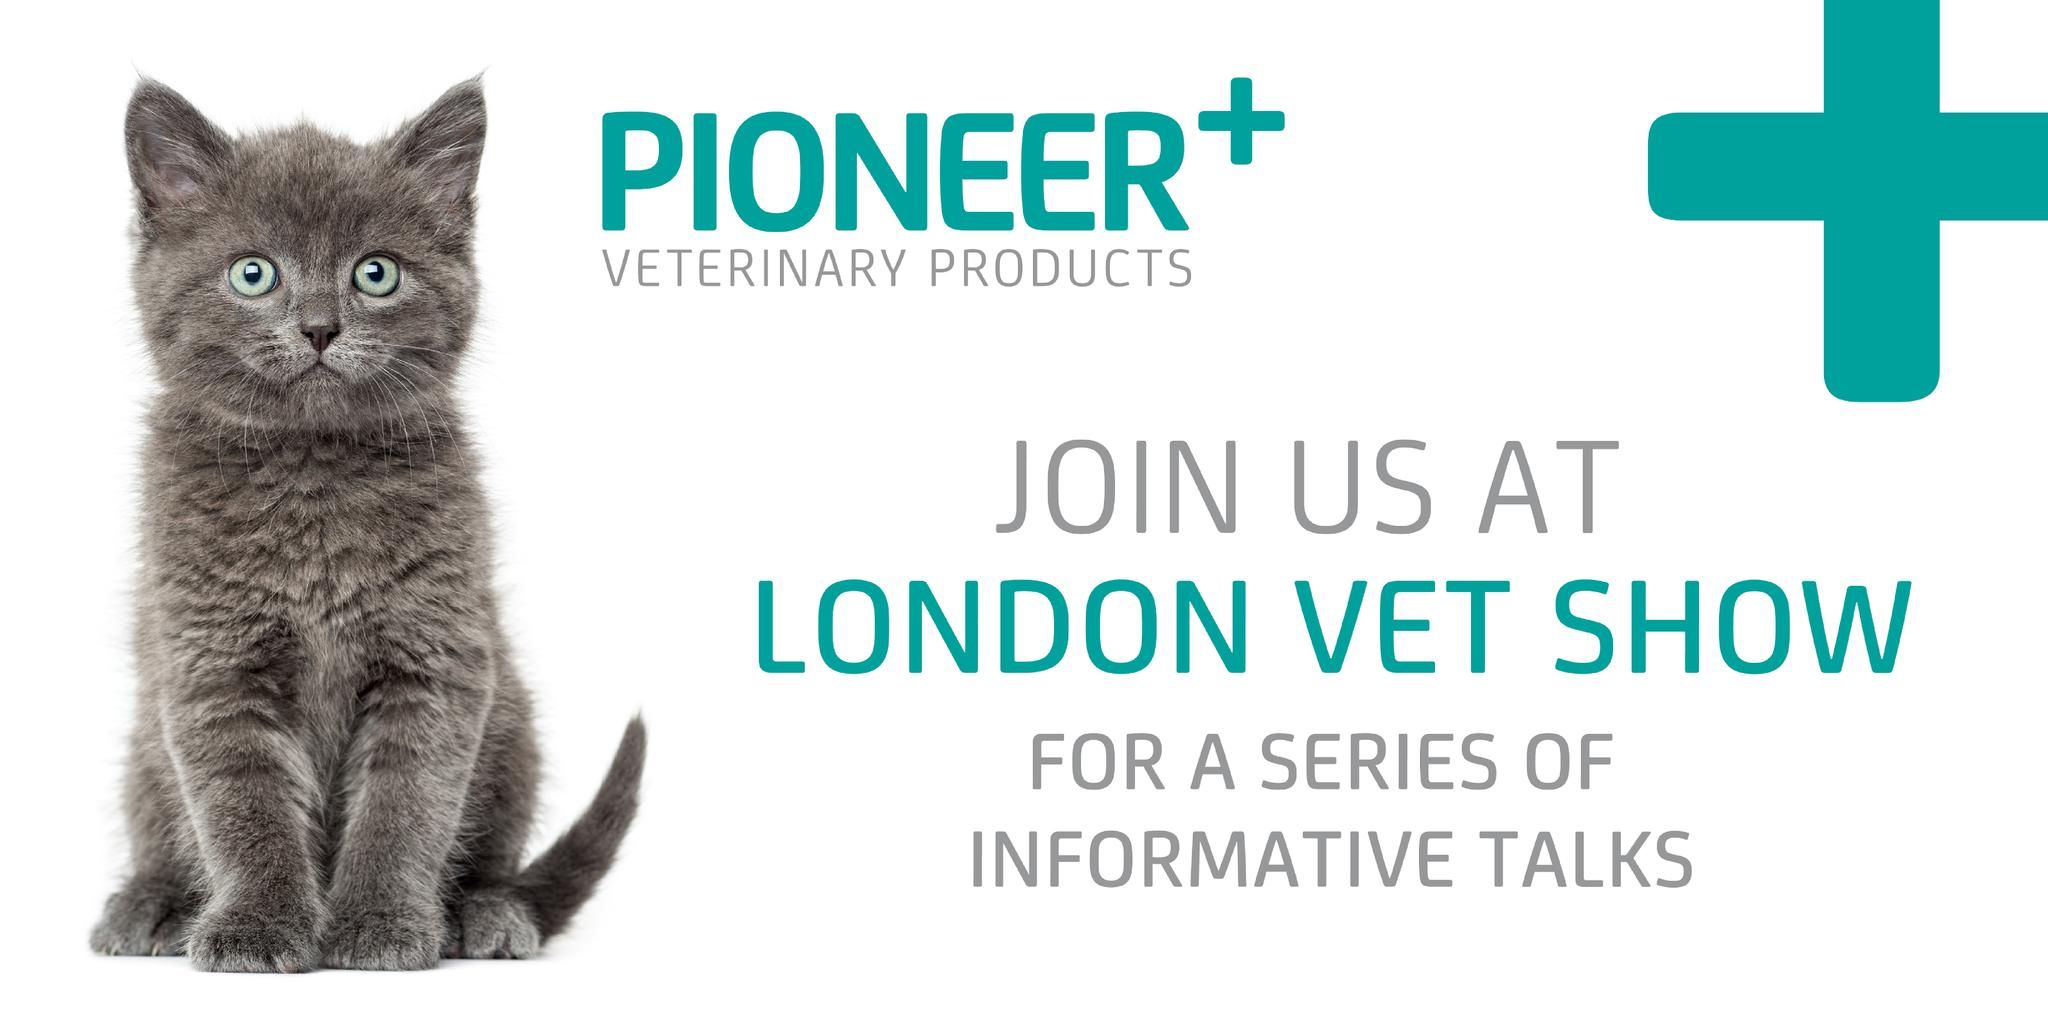 Pioneer Veterinary Products' Talks at London Vet Show